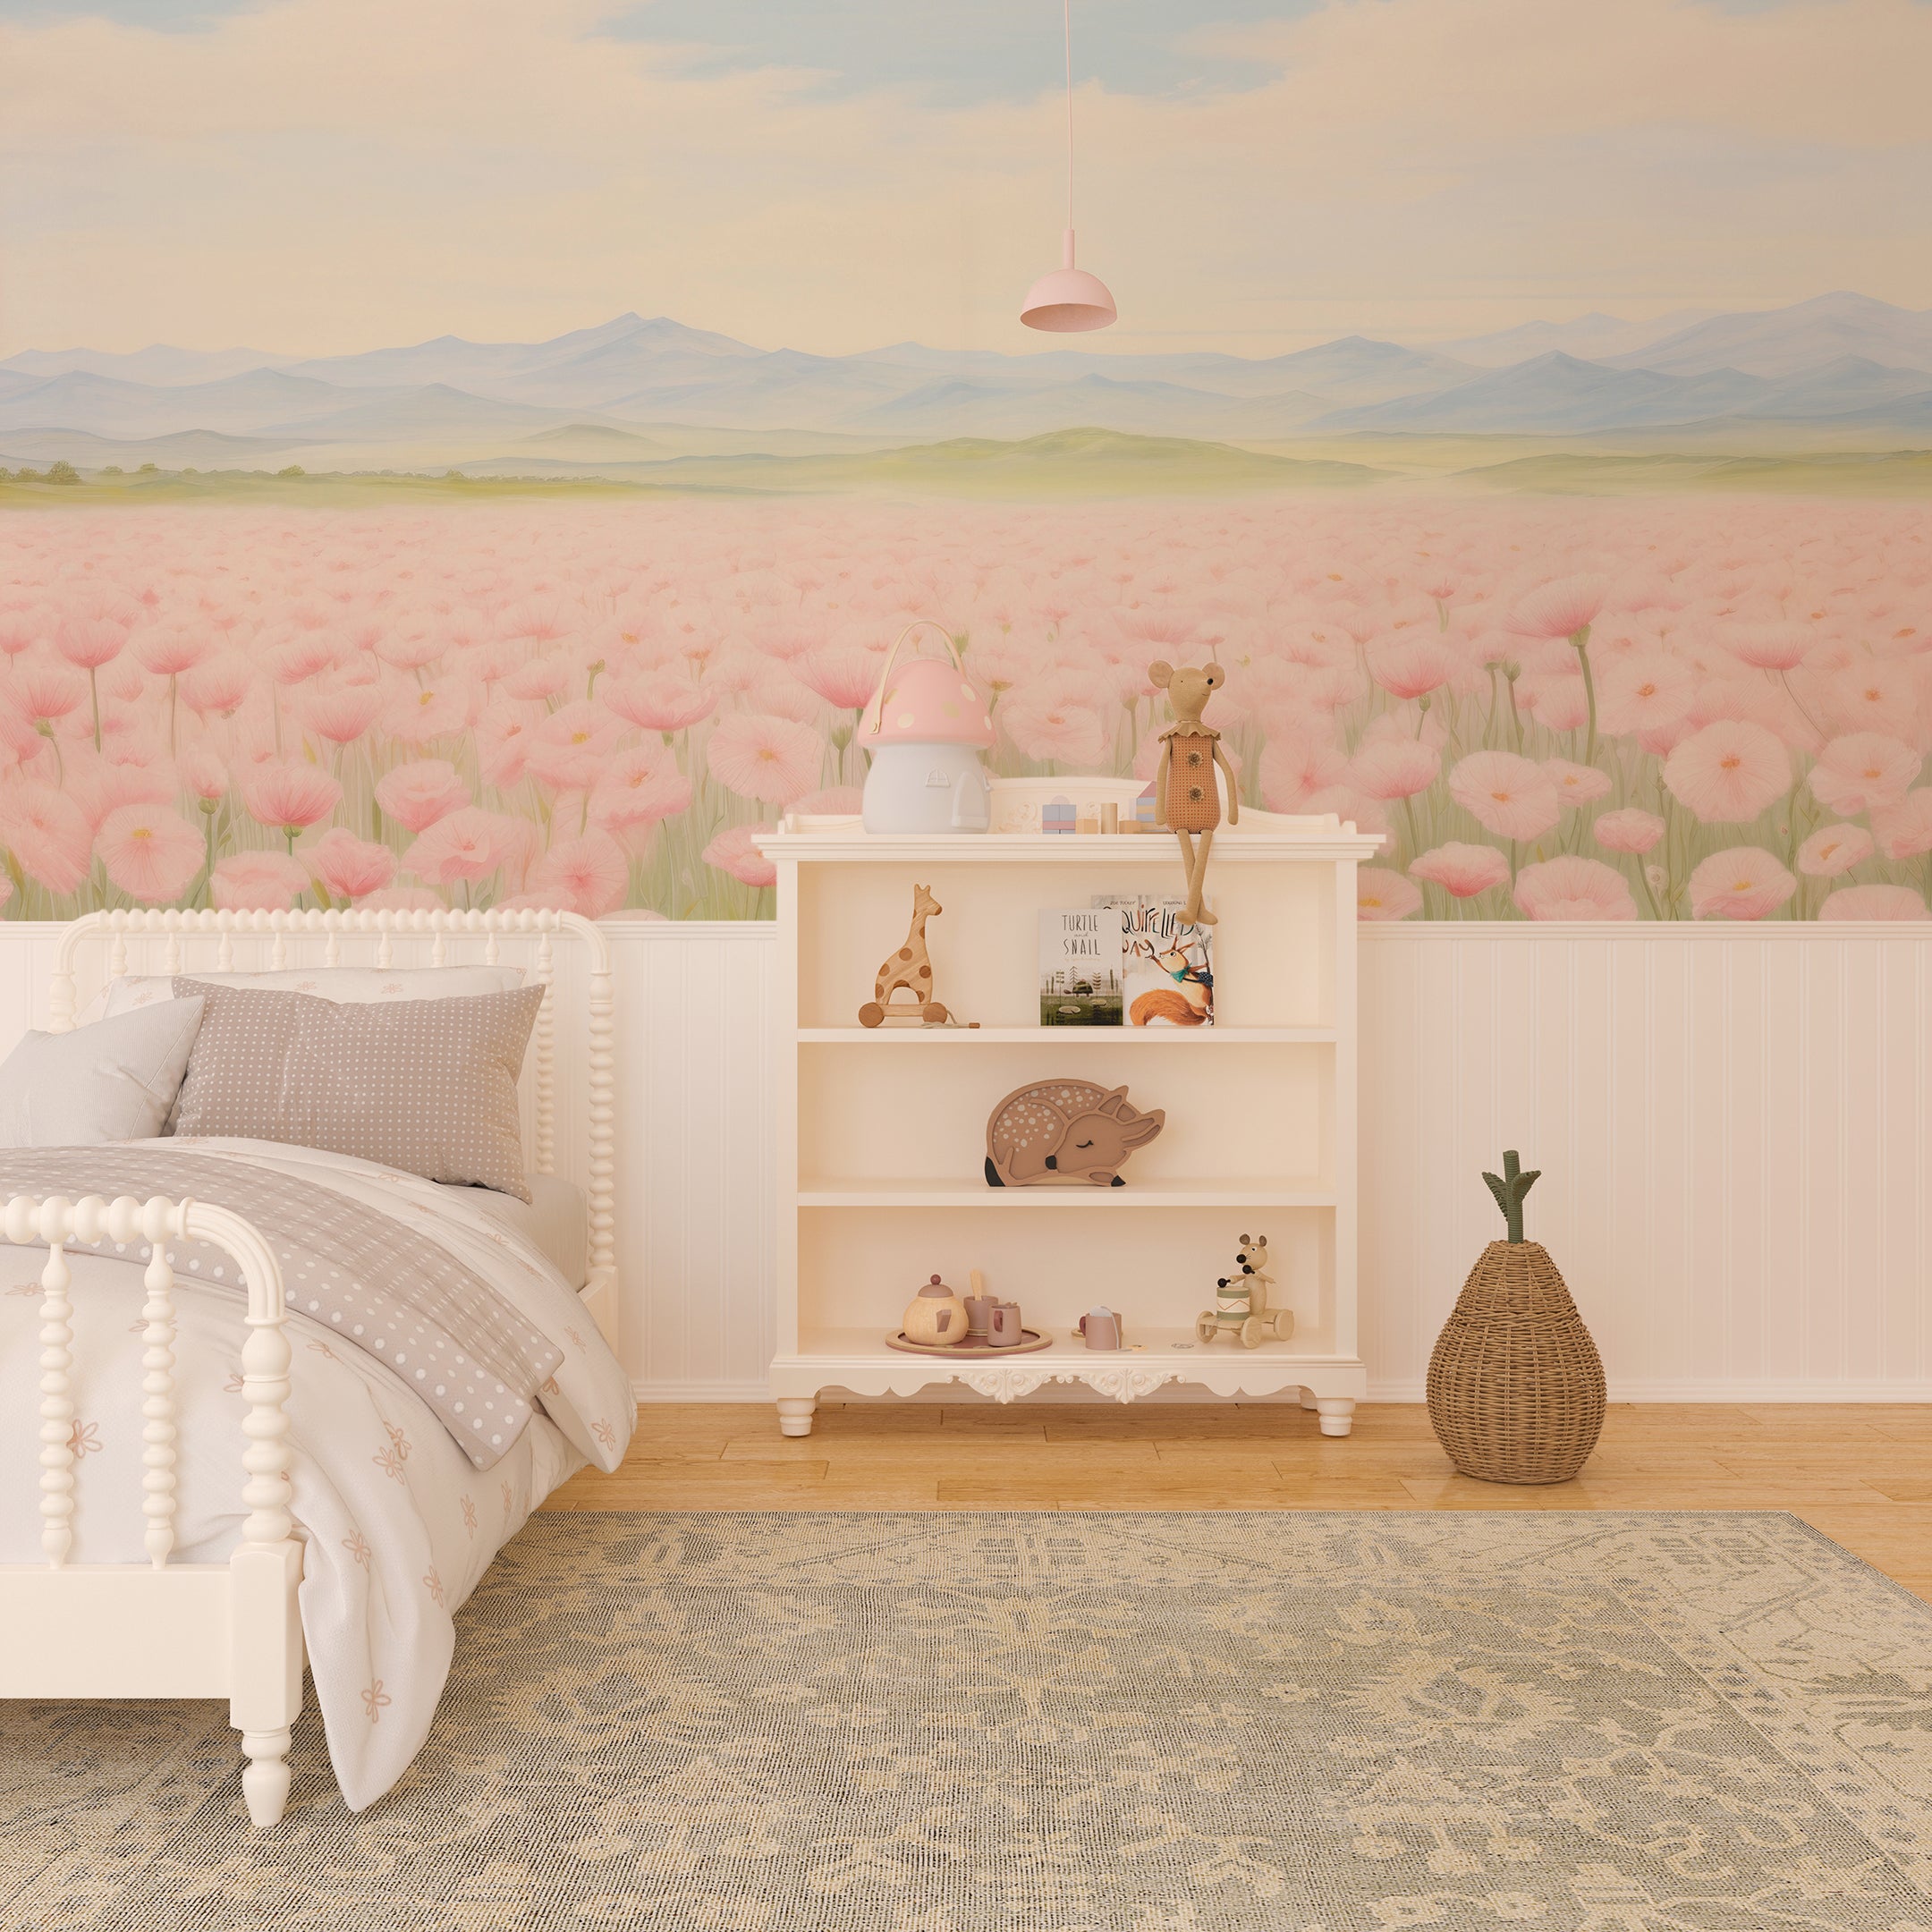 "Serene flower meadow and mountain landscape mural for peaceful home decor."